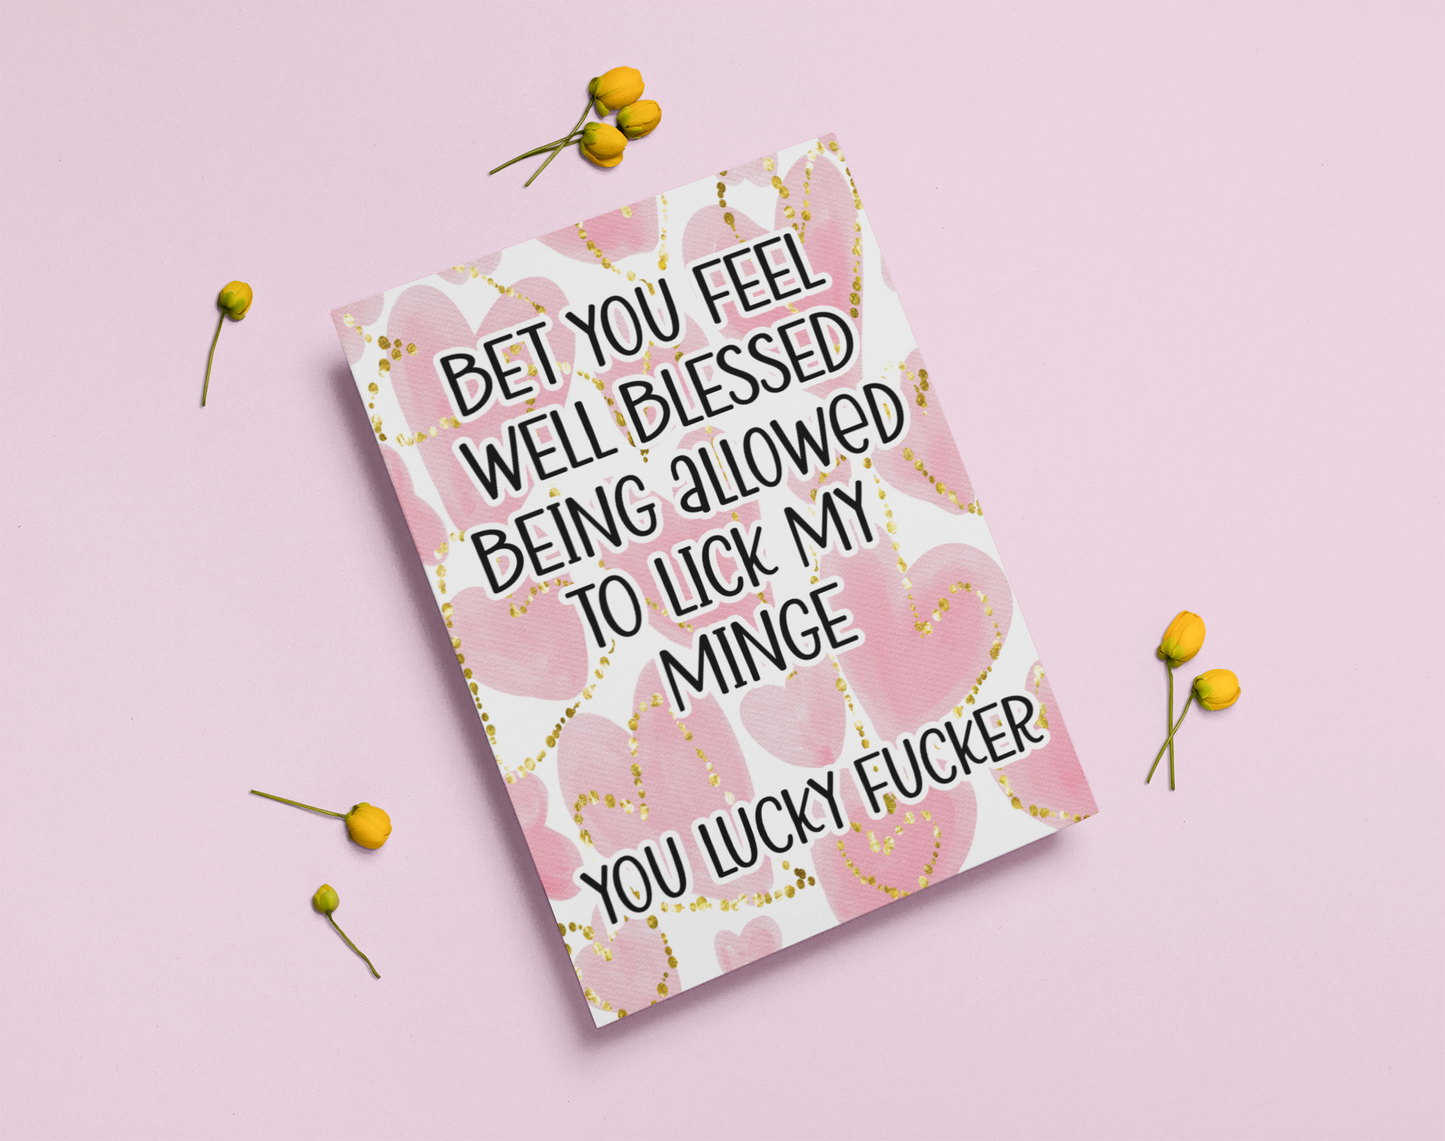 White vertical greetings card with a pink watercolour heart design to the front. Over the design is a funny quote 'bet you feel well blessed being allowed to lick my minge.. you lucky fucker'. Printed in back ink.